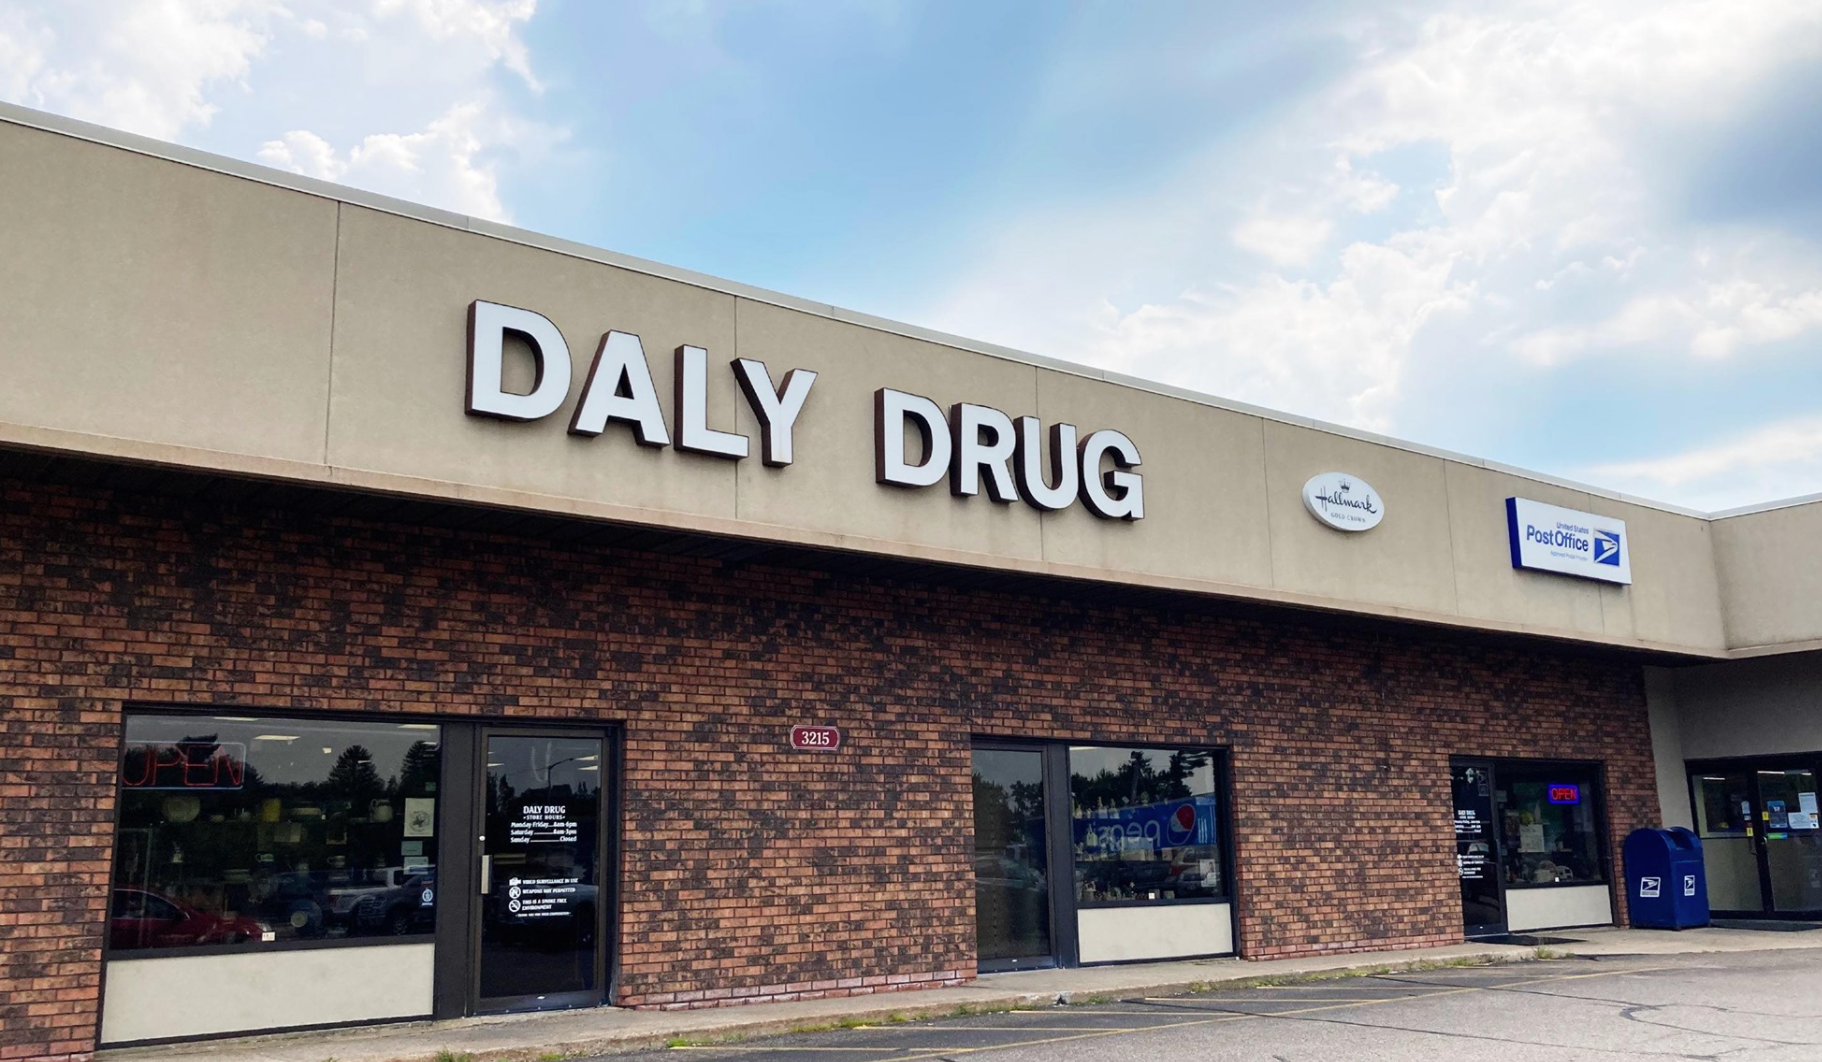 WELCOME TO DALY DRUG